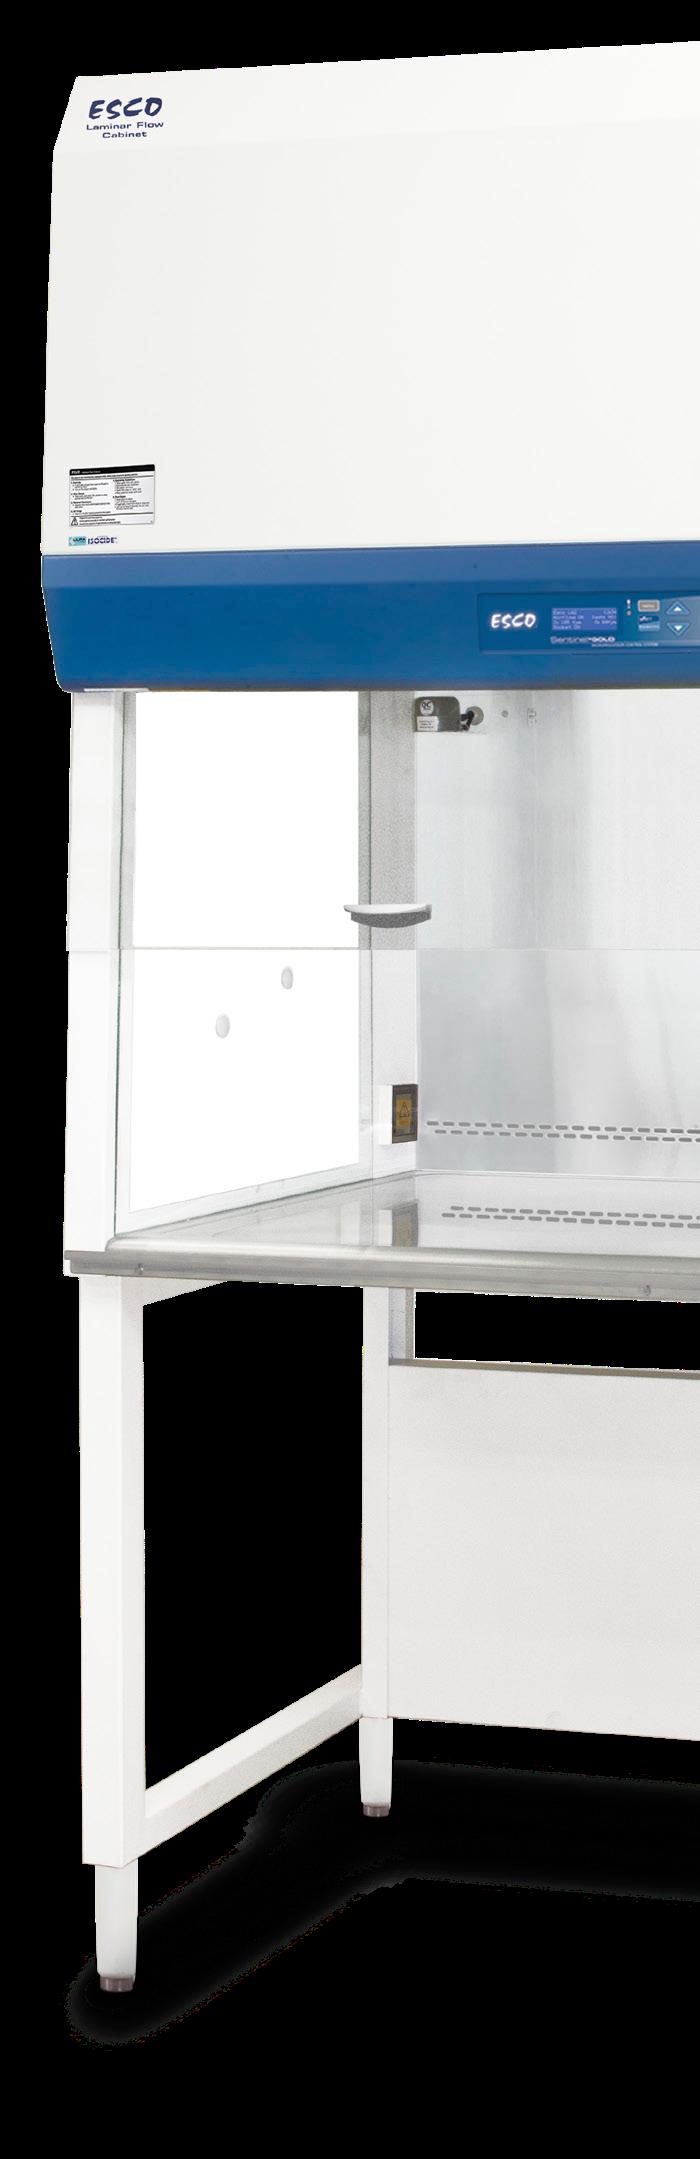 down for easy reach & viewing ADA-Compliant 4 Work Top The spill-retaining work top design with a